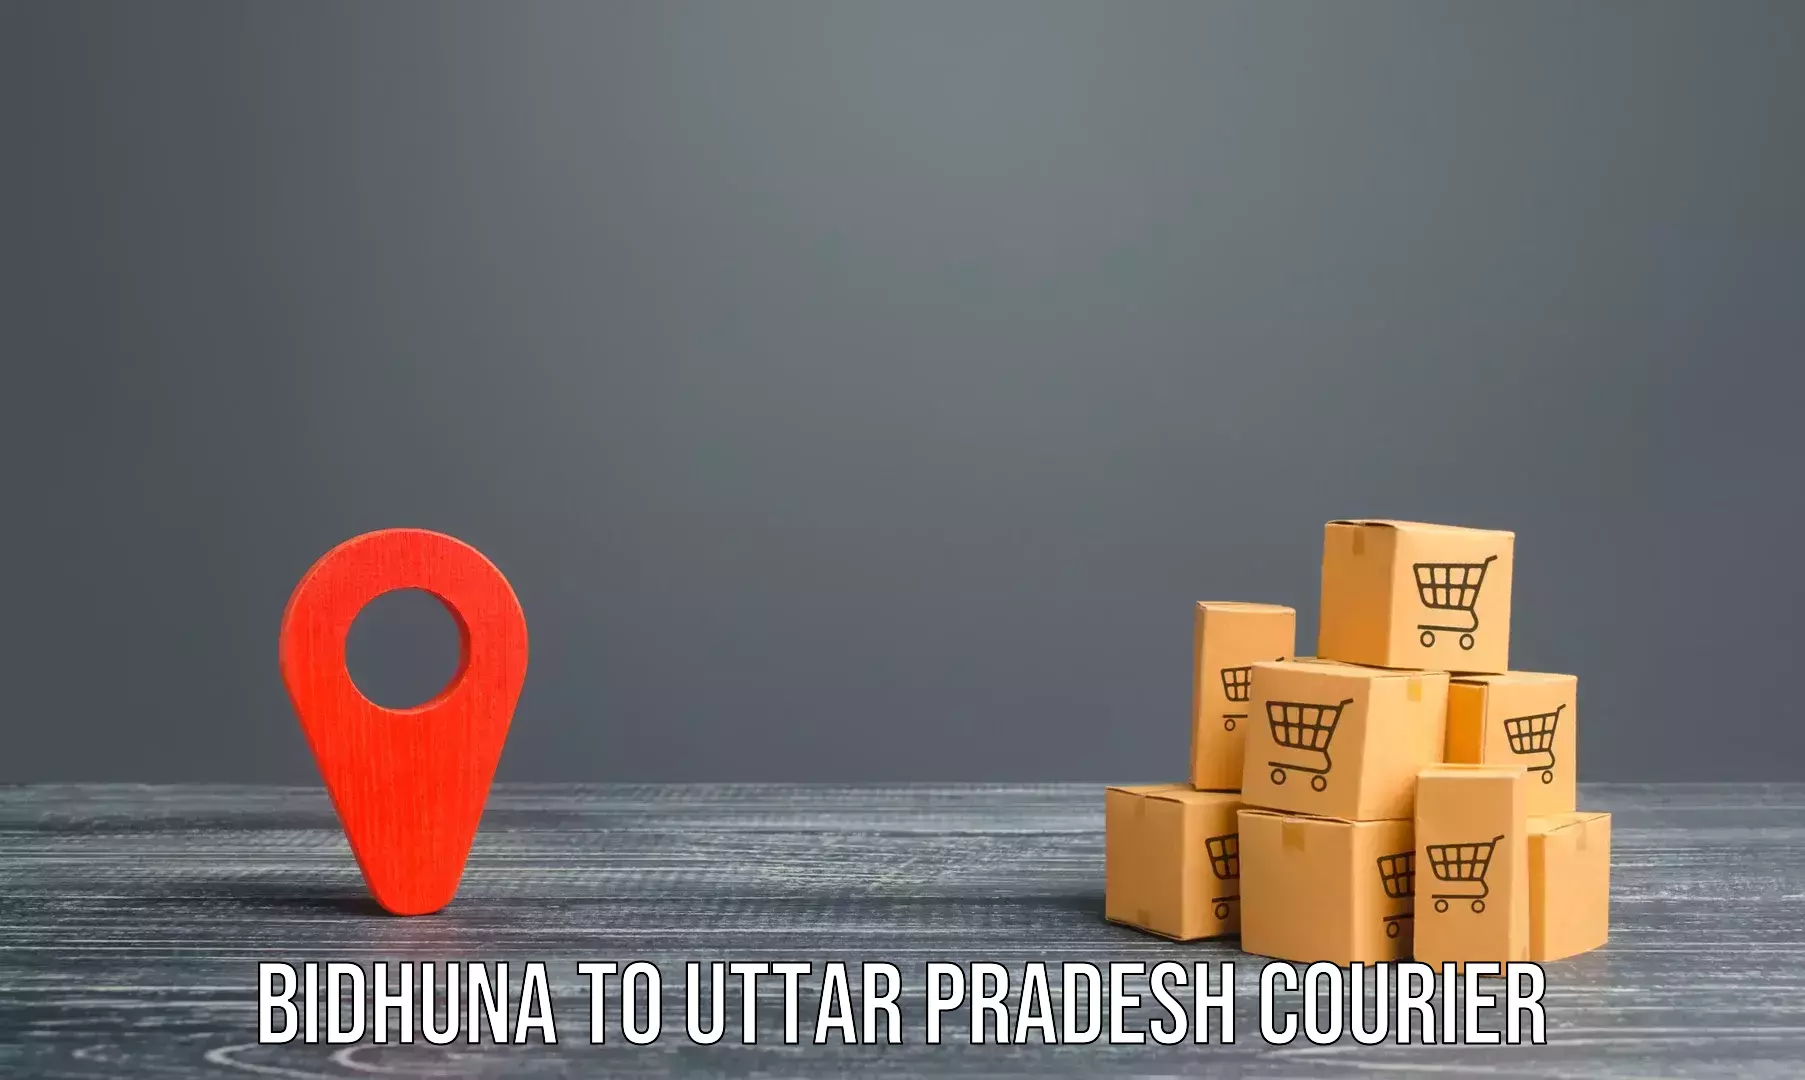 High-quality moving services in Bidhuna to Varanasi